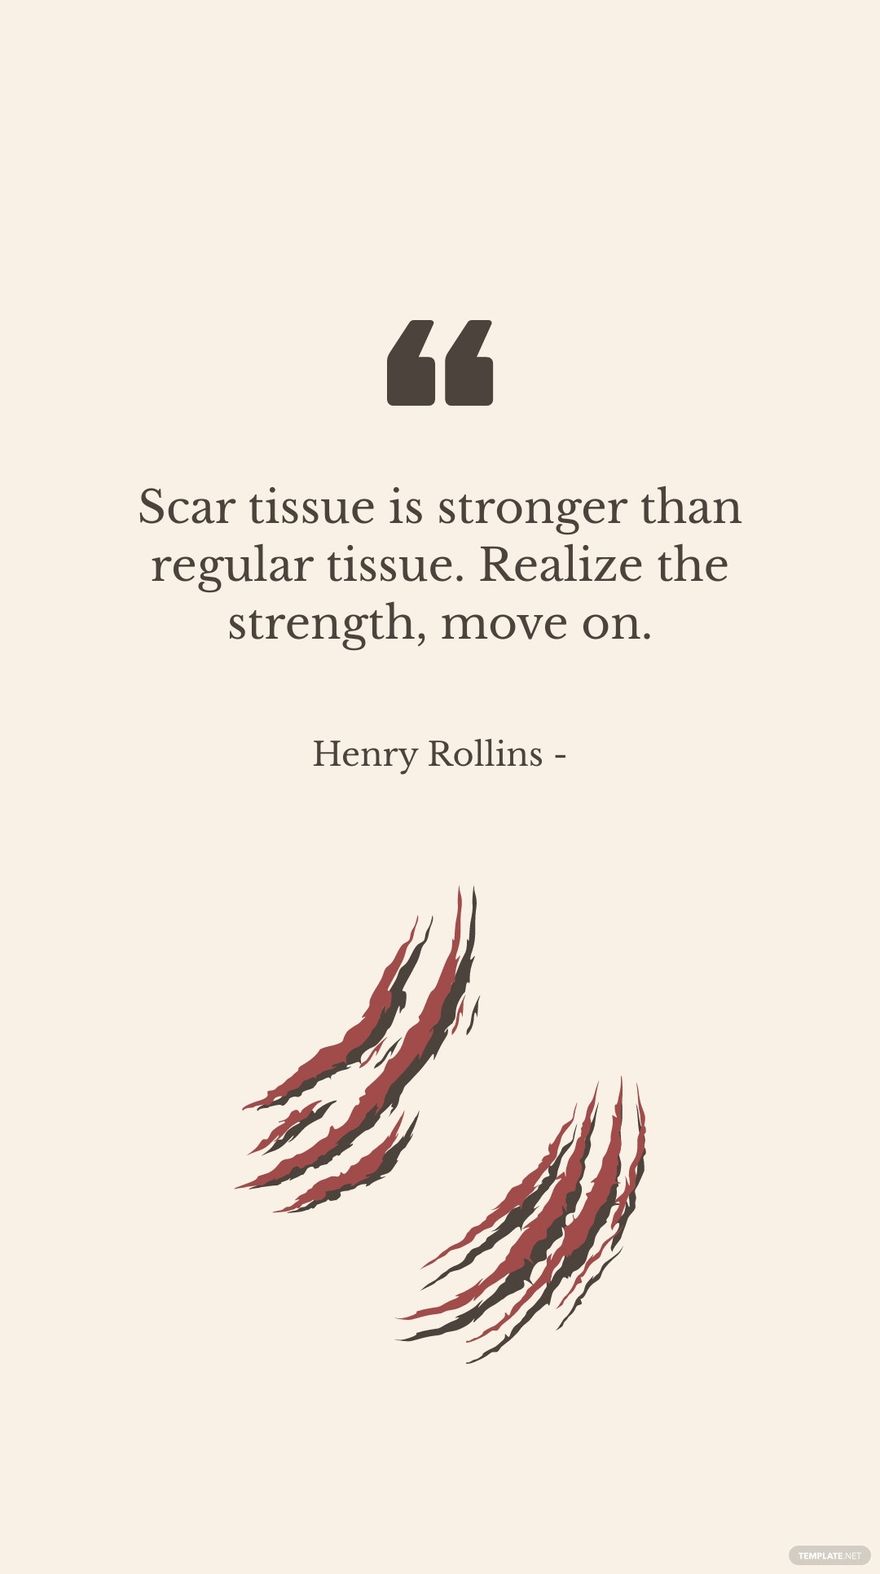 Free Henry Rollins - Scar tissue is stronger than regular tissue. Realize the strength, move on. in JPG